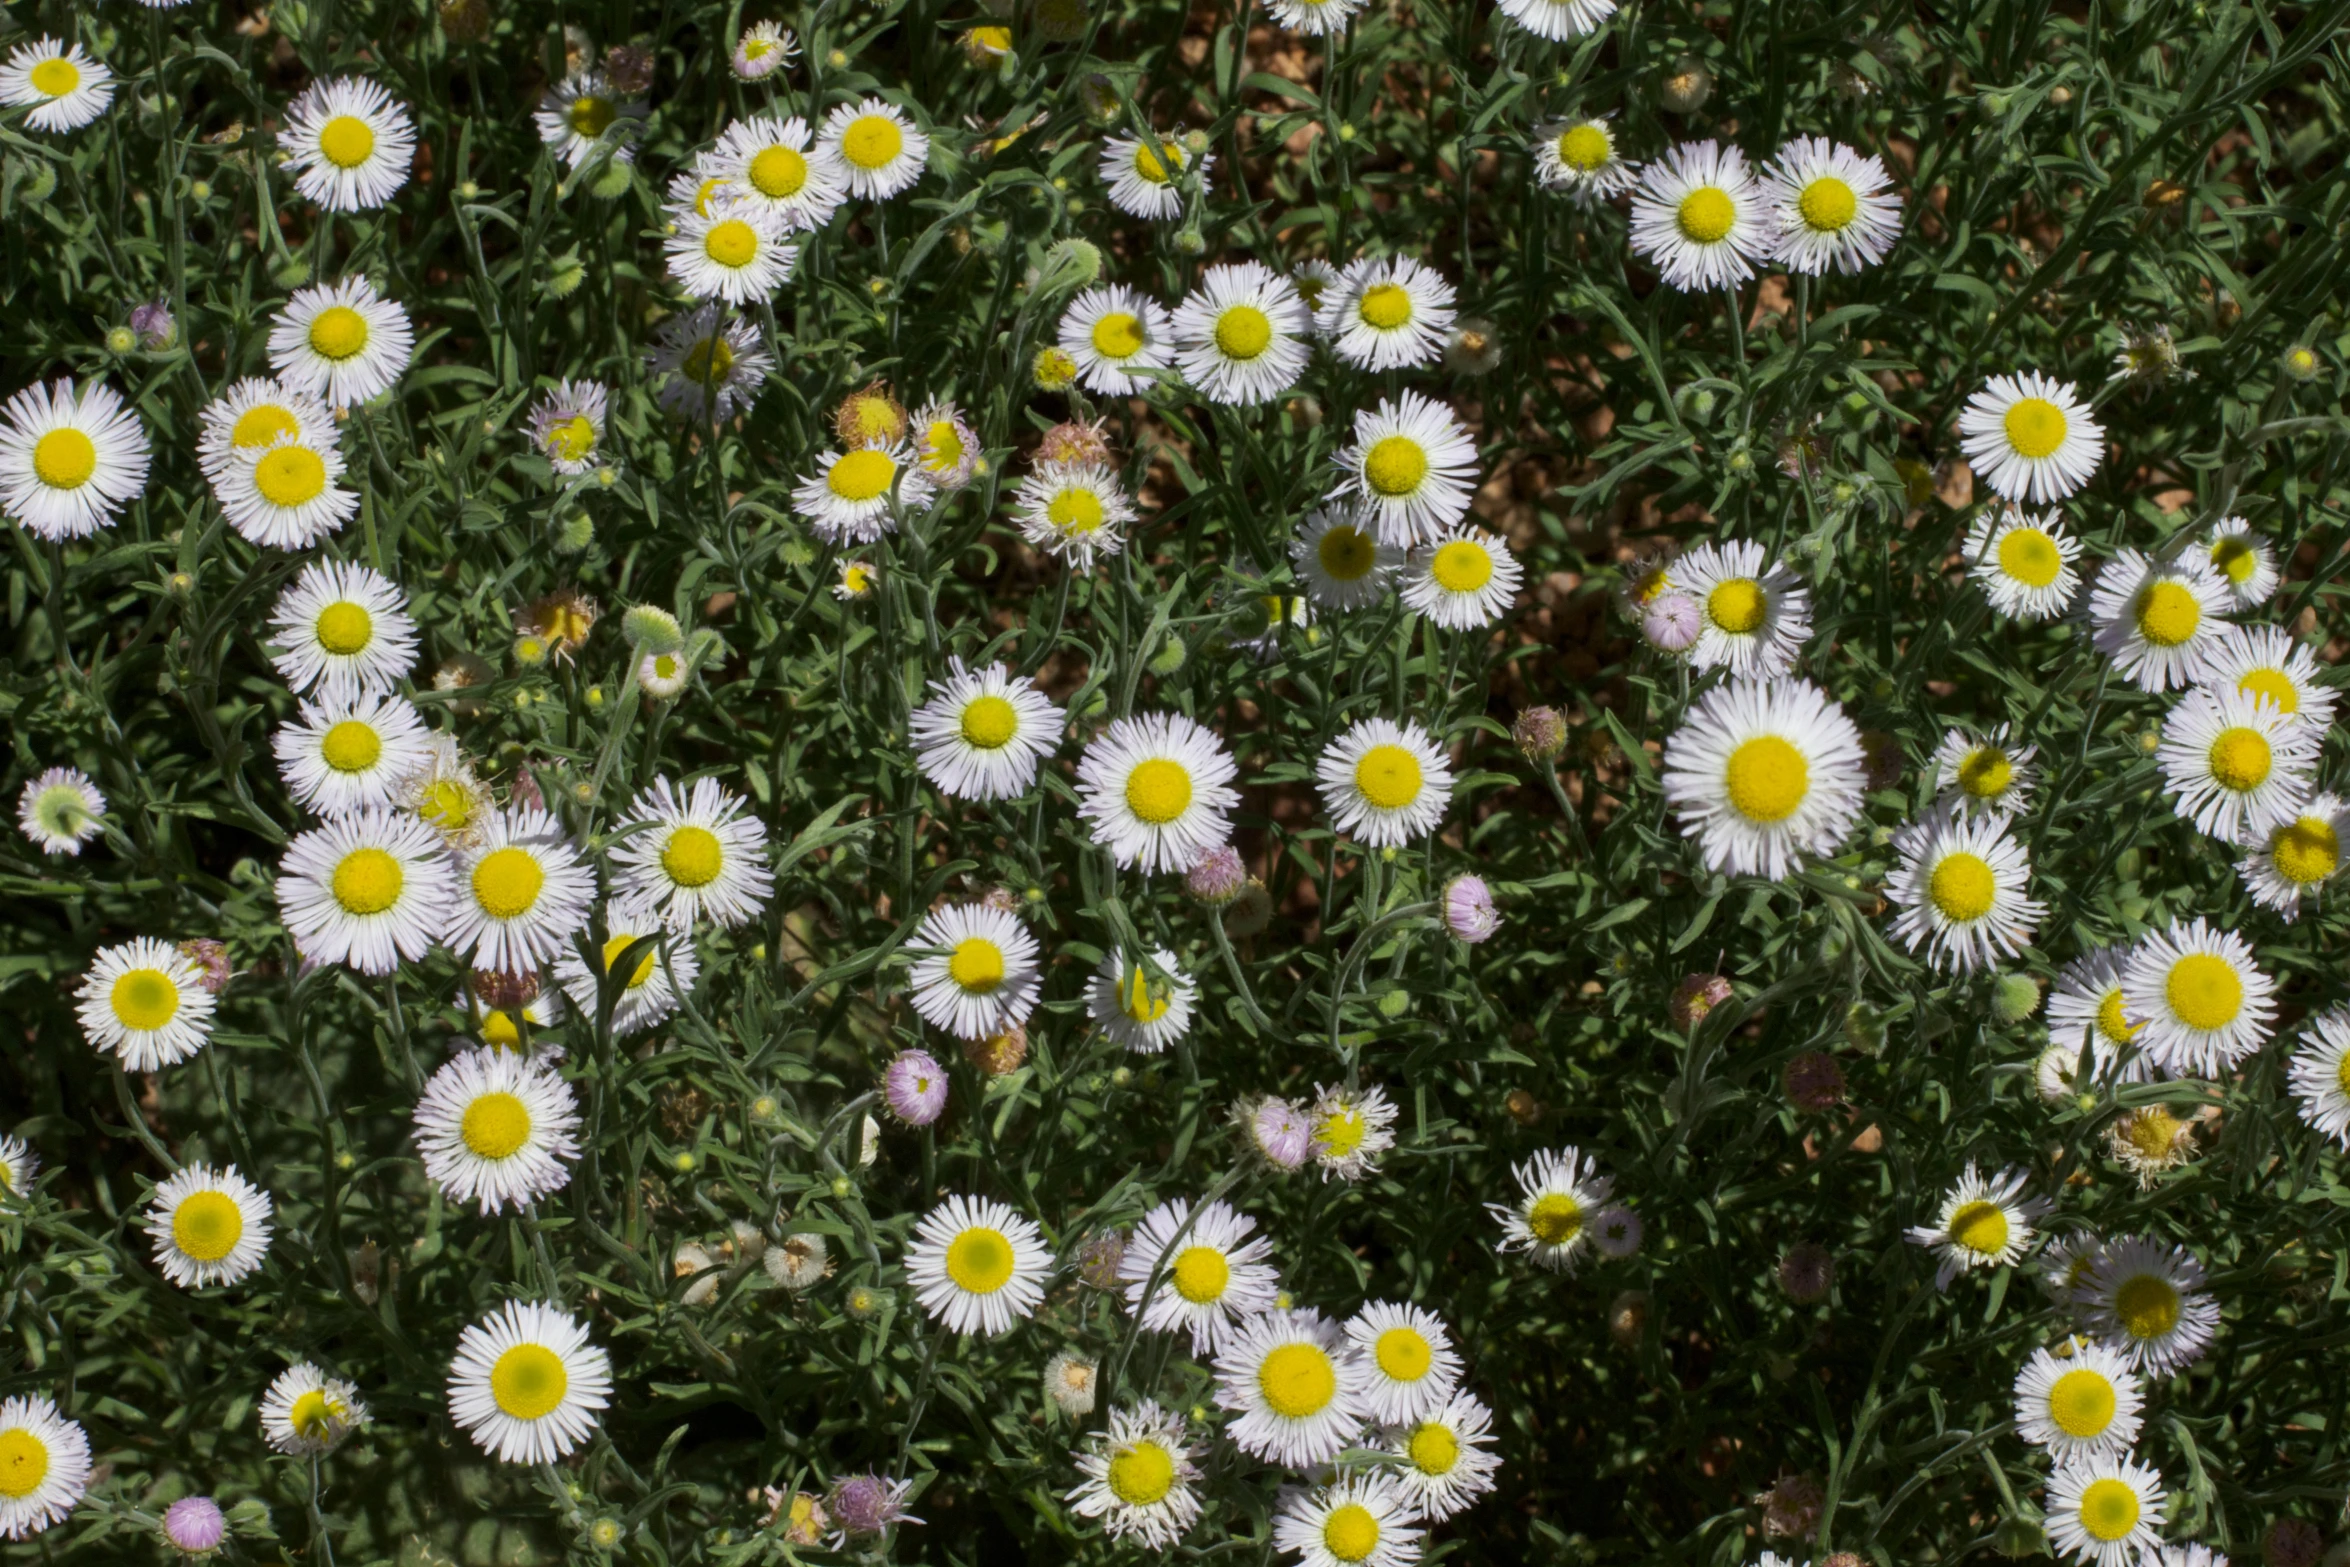 many yellow and white daisies growing in a field